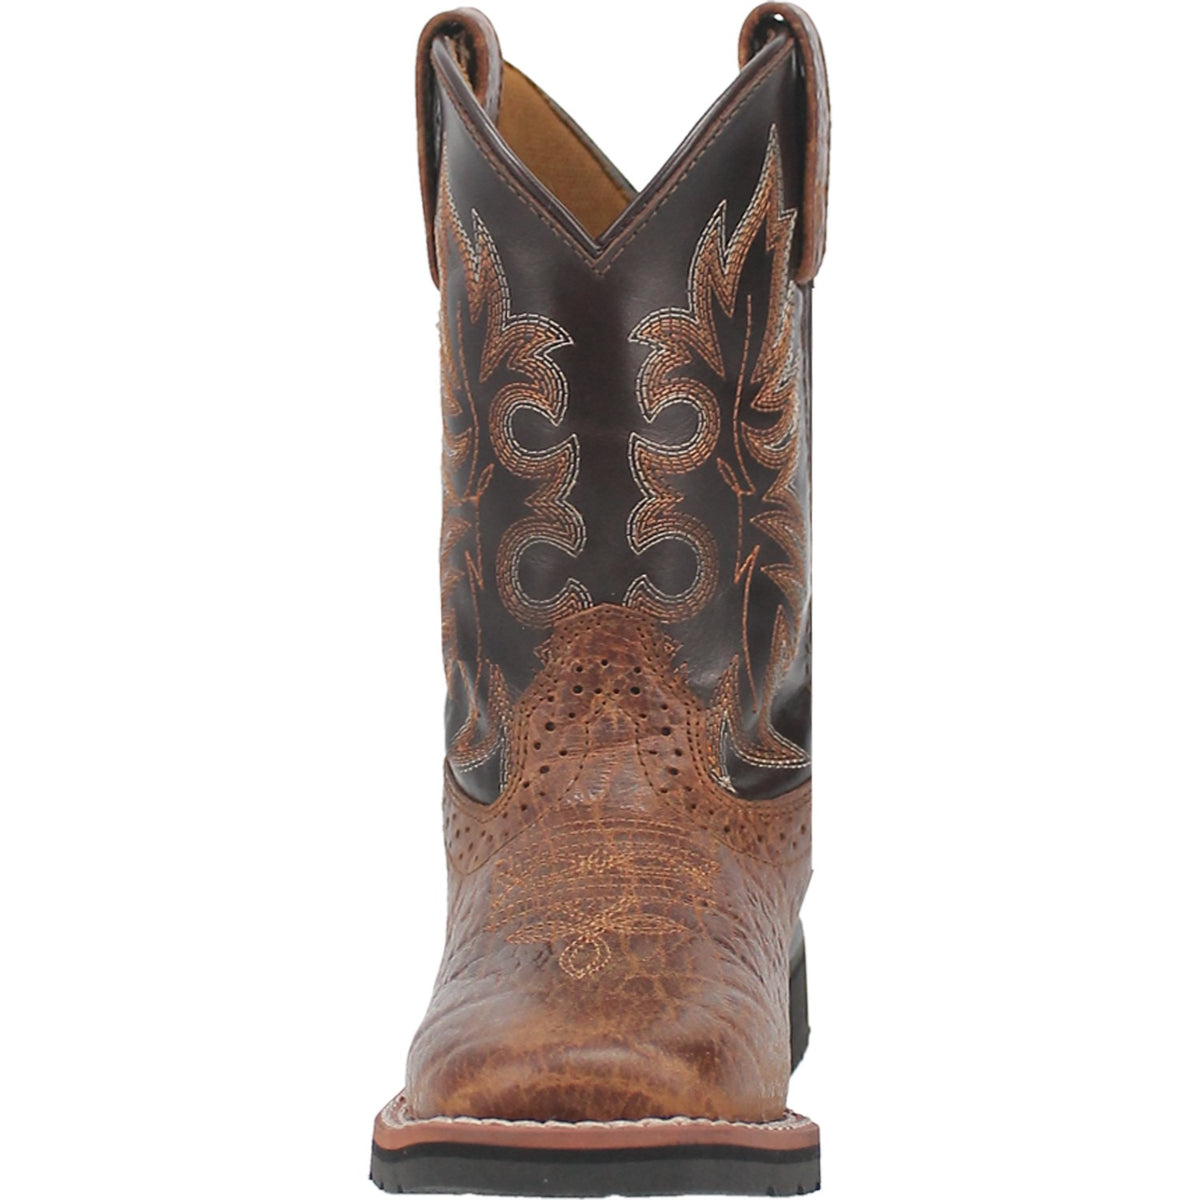 LIL' BROKEN BOW LEATHER CHILDREN'S BOOT Cover